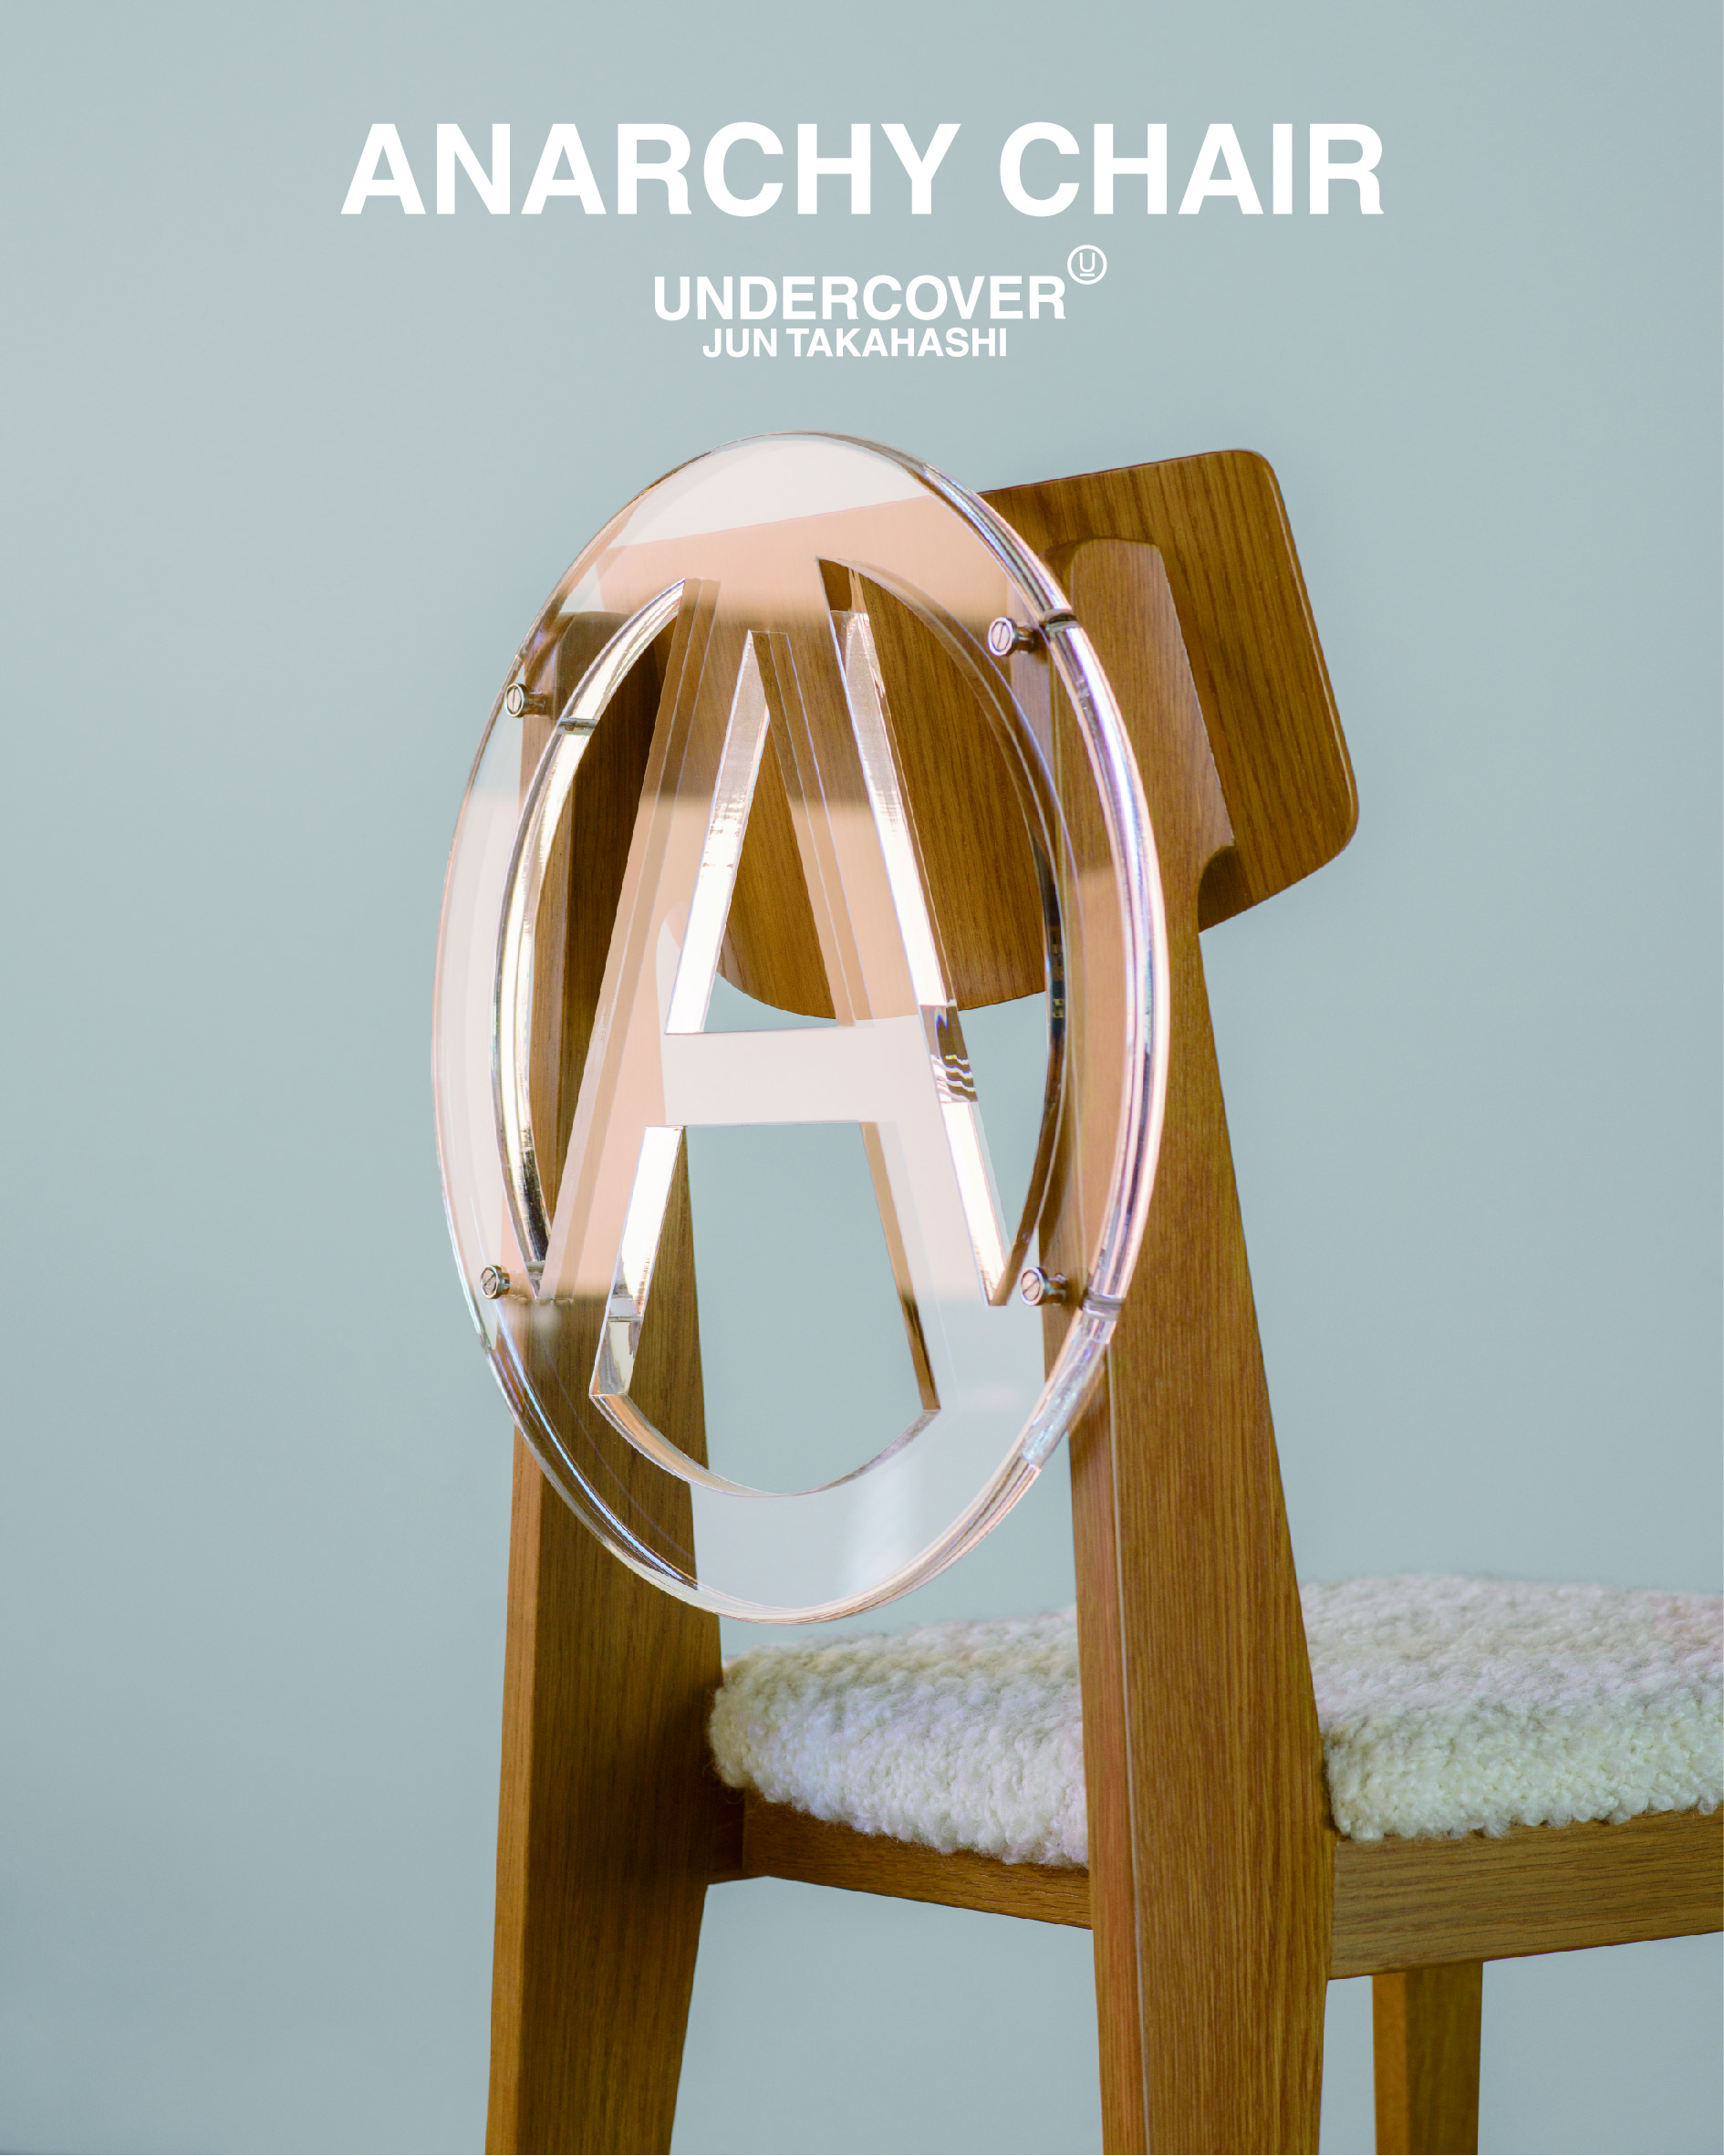 UNDERCOVER 天童木工 ANARCHY CHAIR アナーキーチェアー